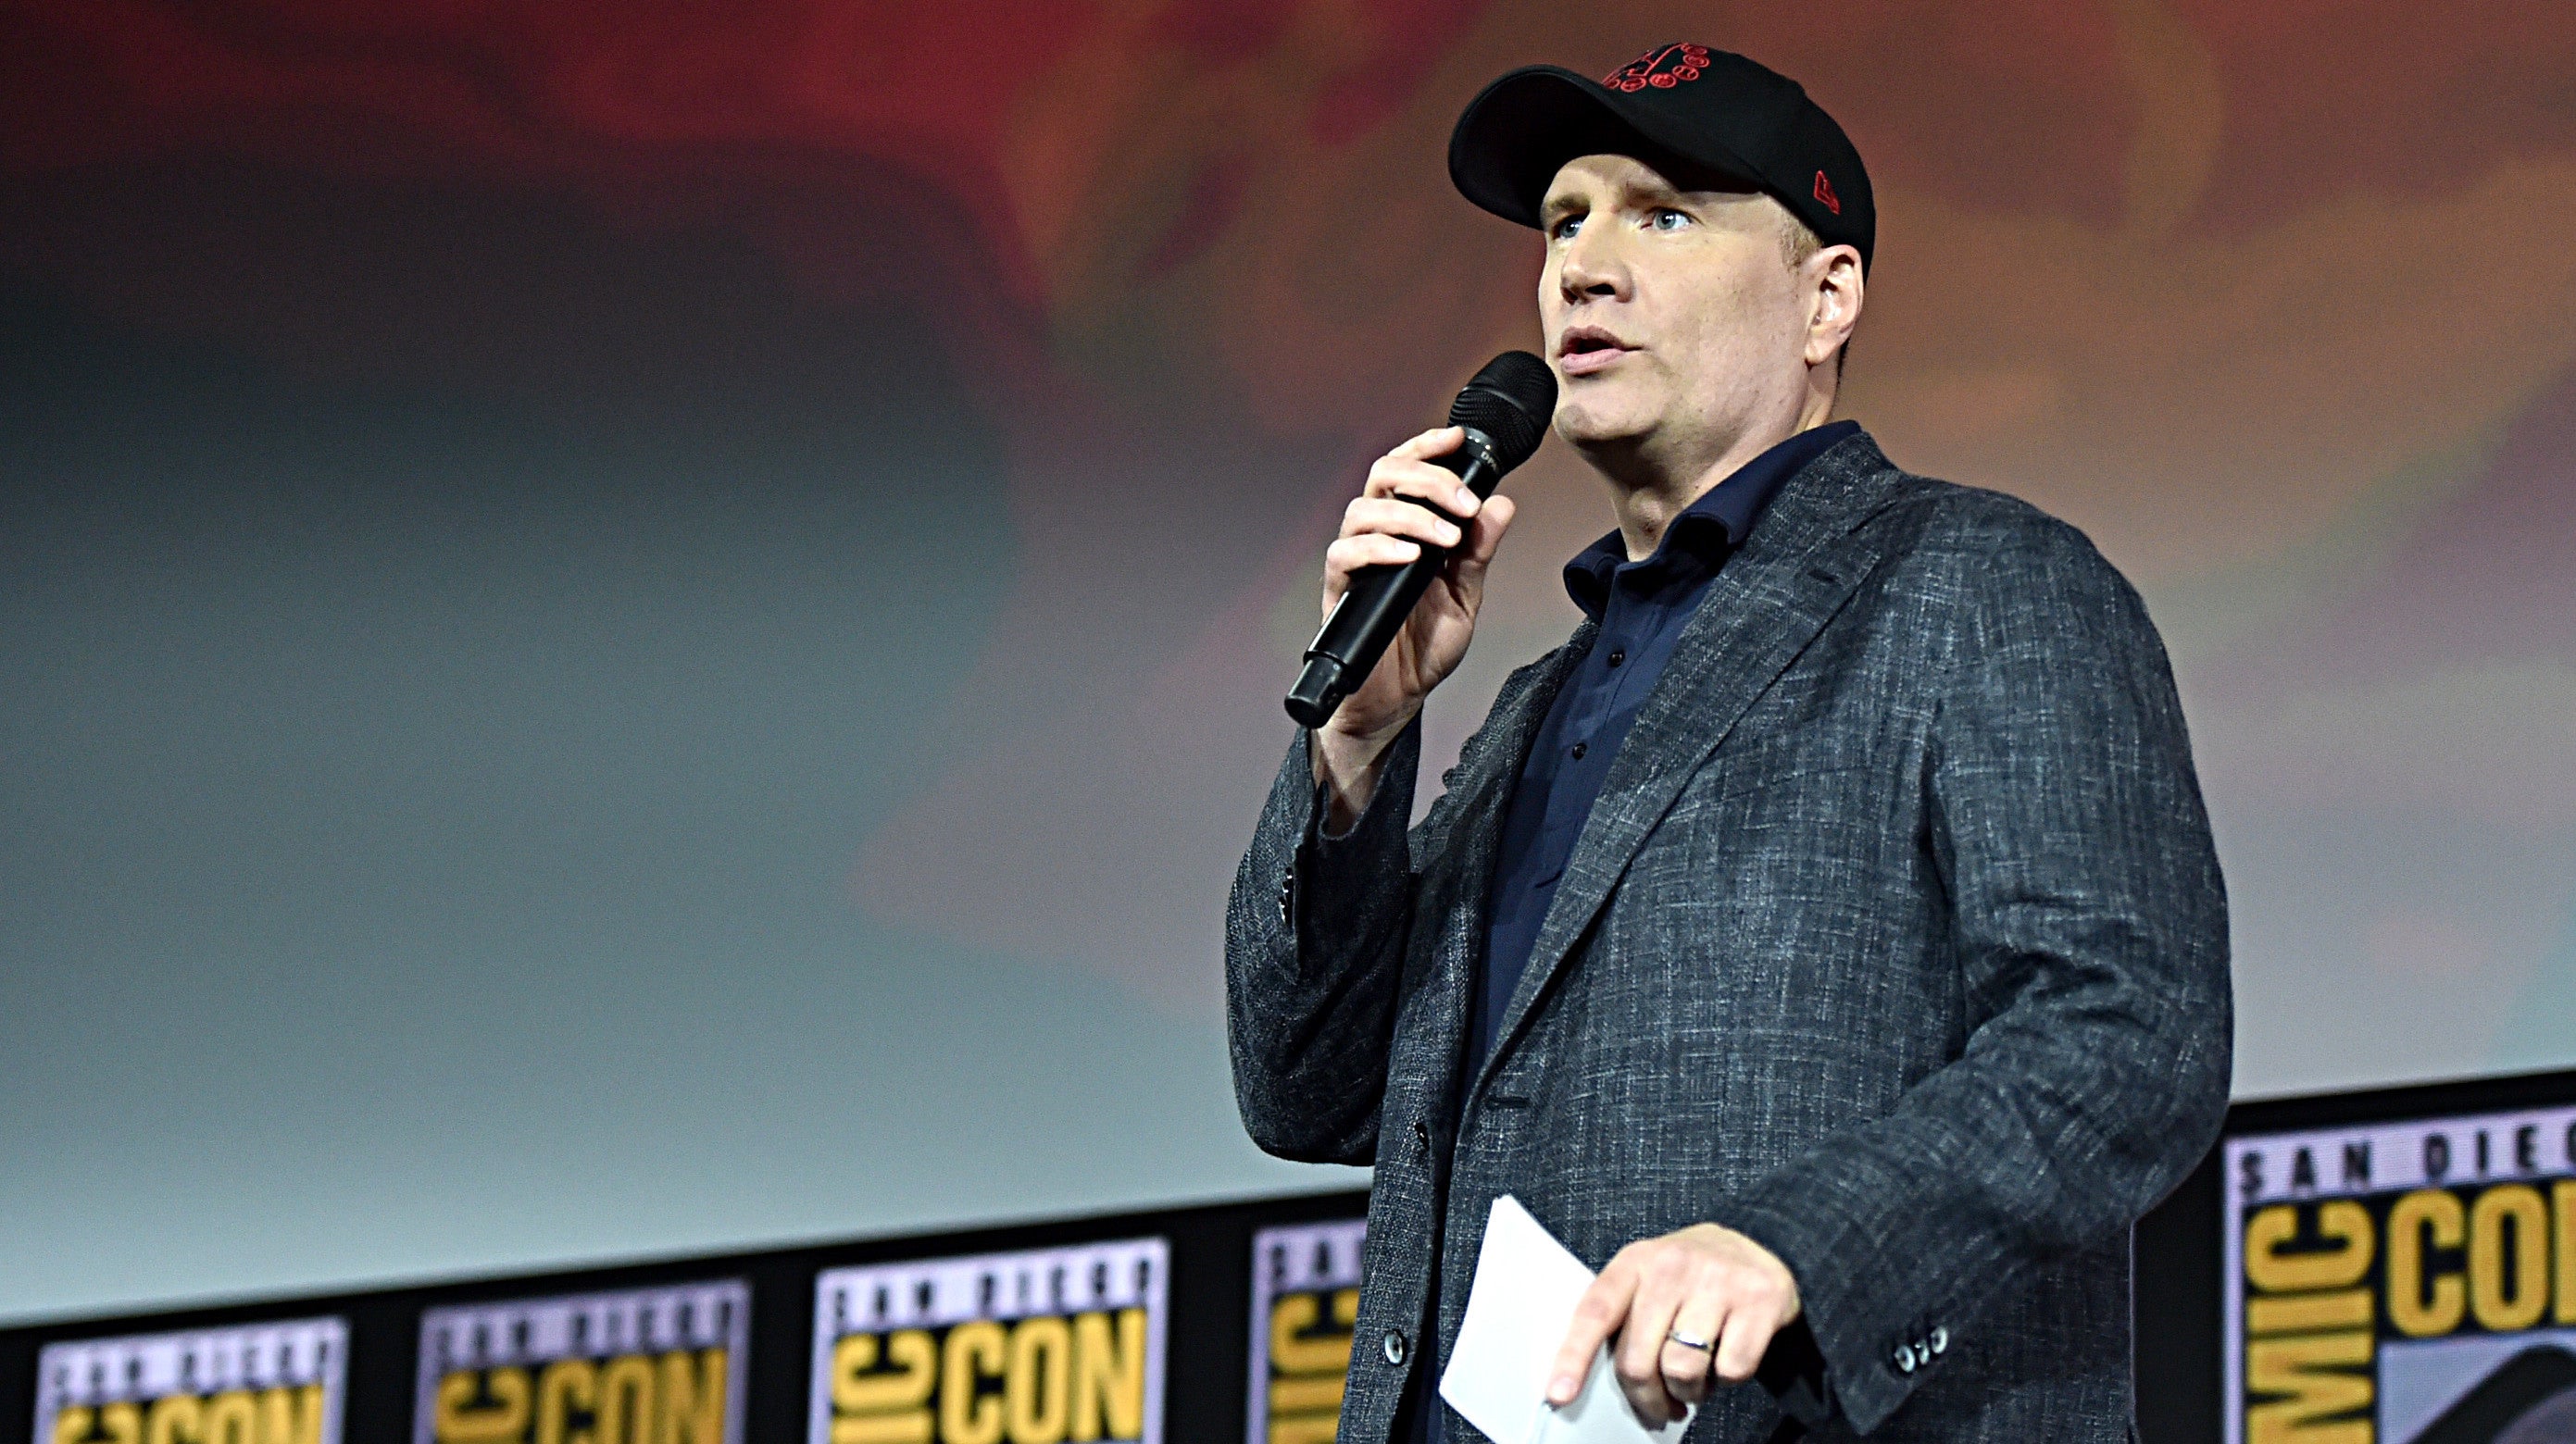 Marvel’s Kevin Feige Will Work On A Star Wars Movie